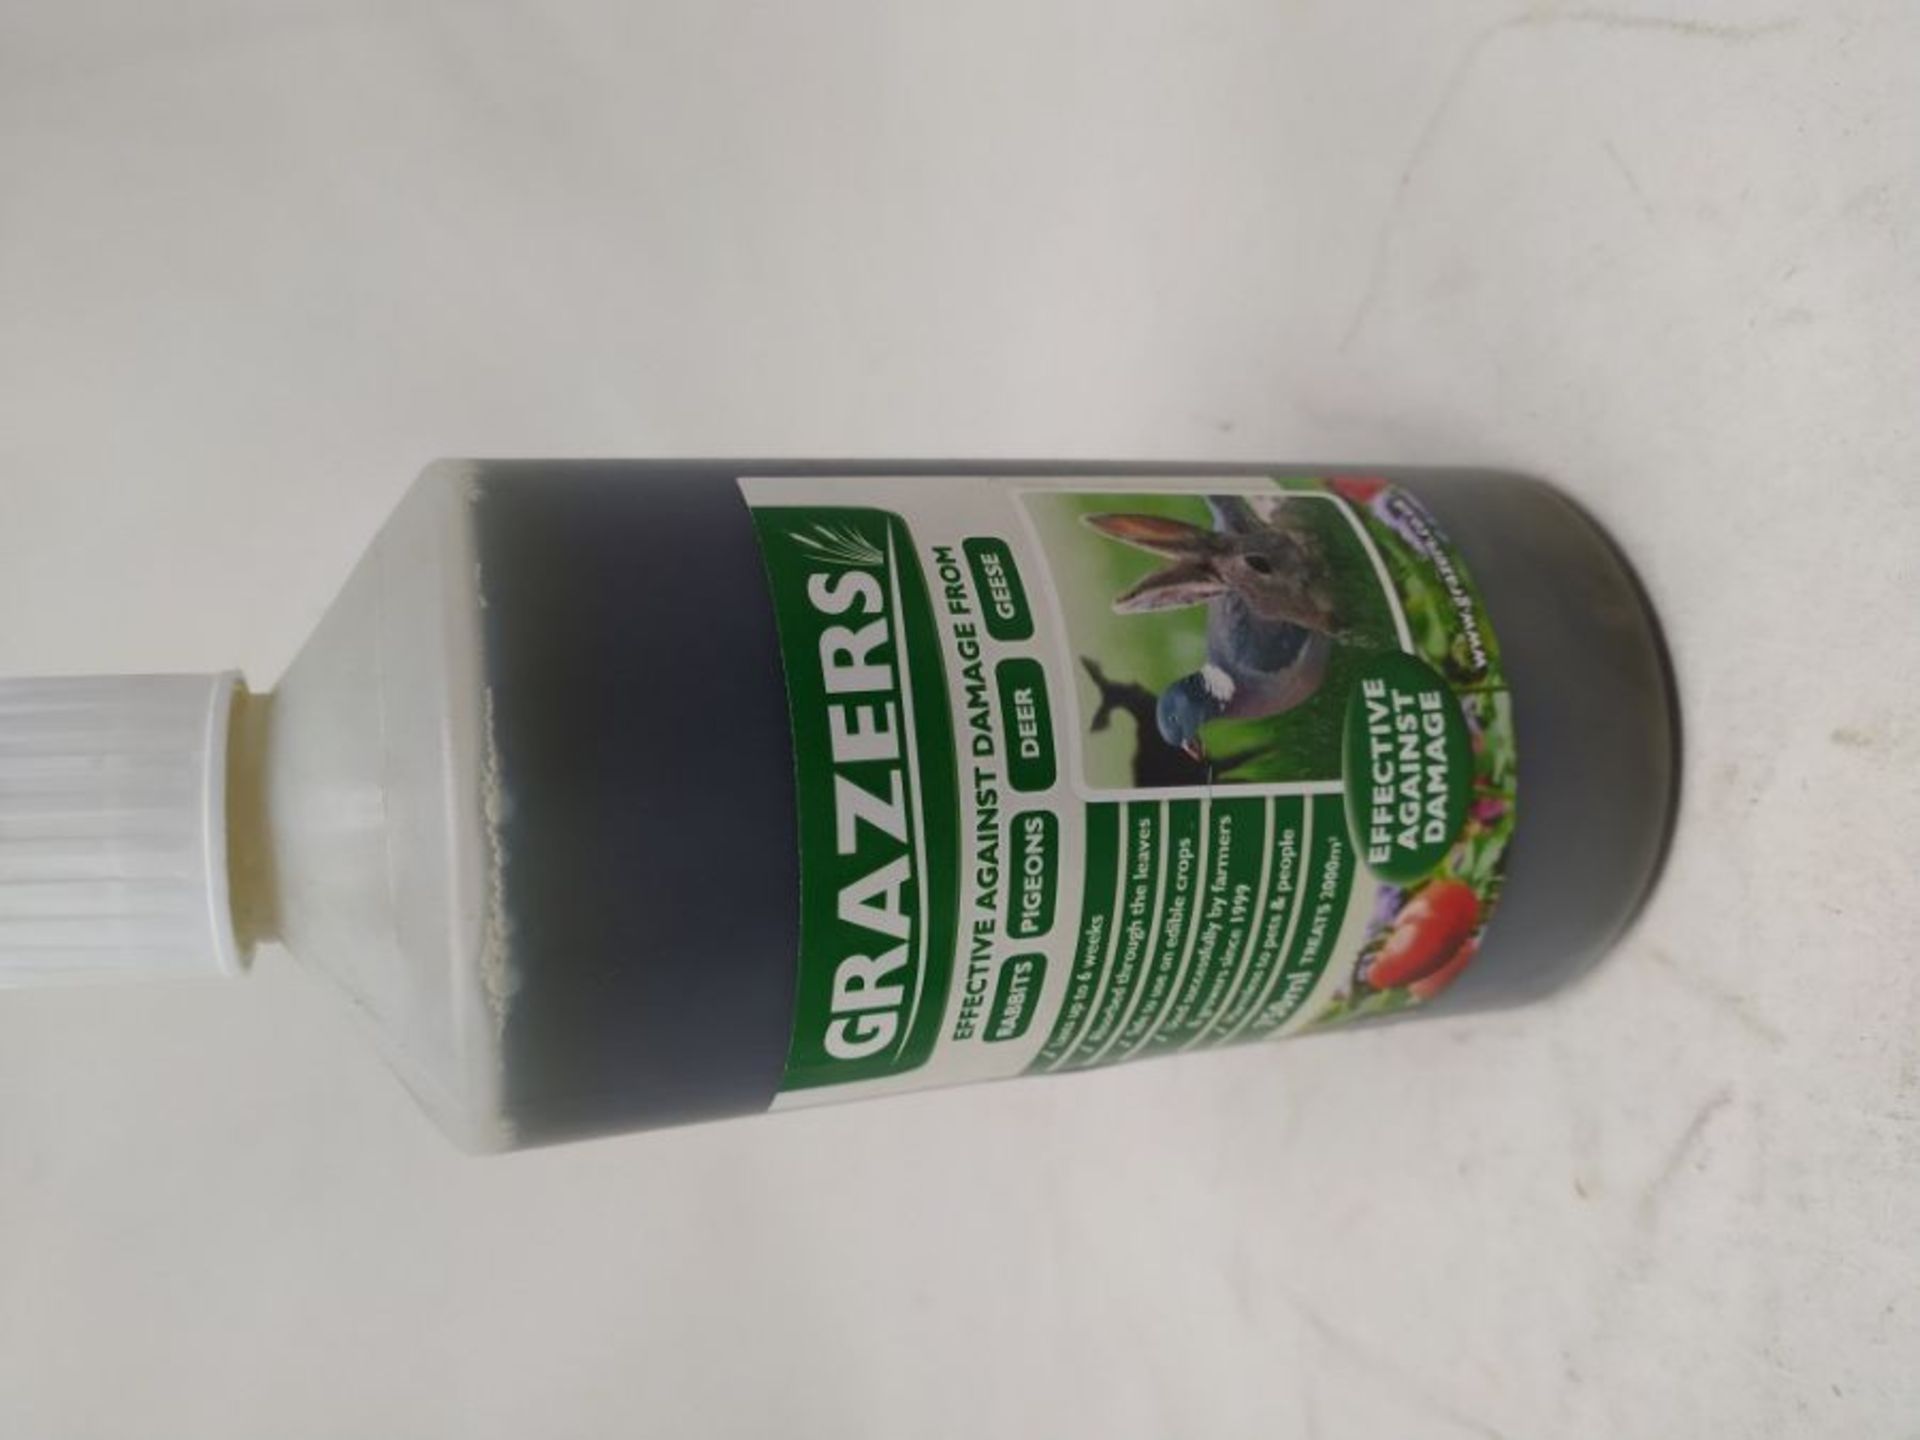 Grazers ltd GRAZERS G1 Concentrate 750ml Effective Against Damage from Rabbits, Pigeon - Image 2 of 2